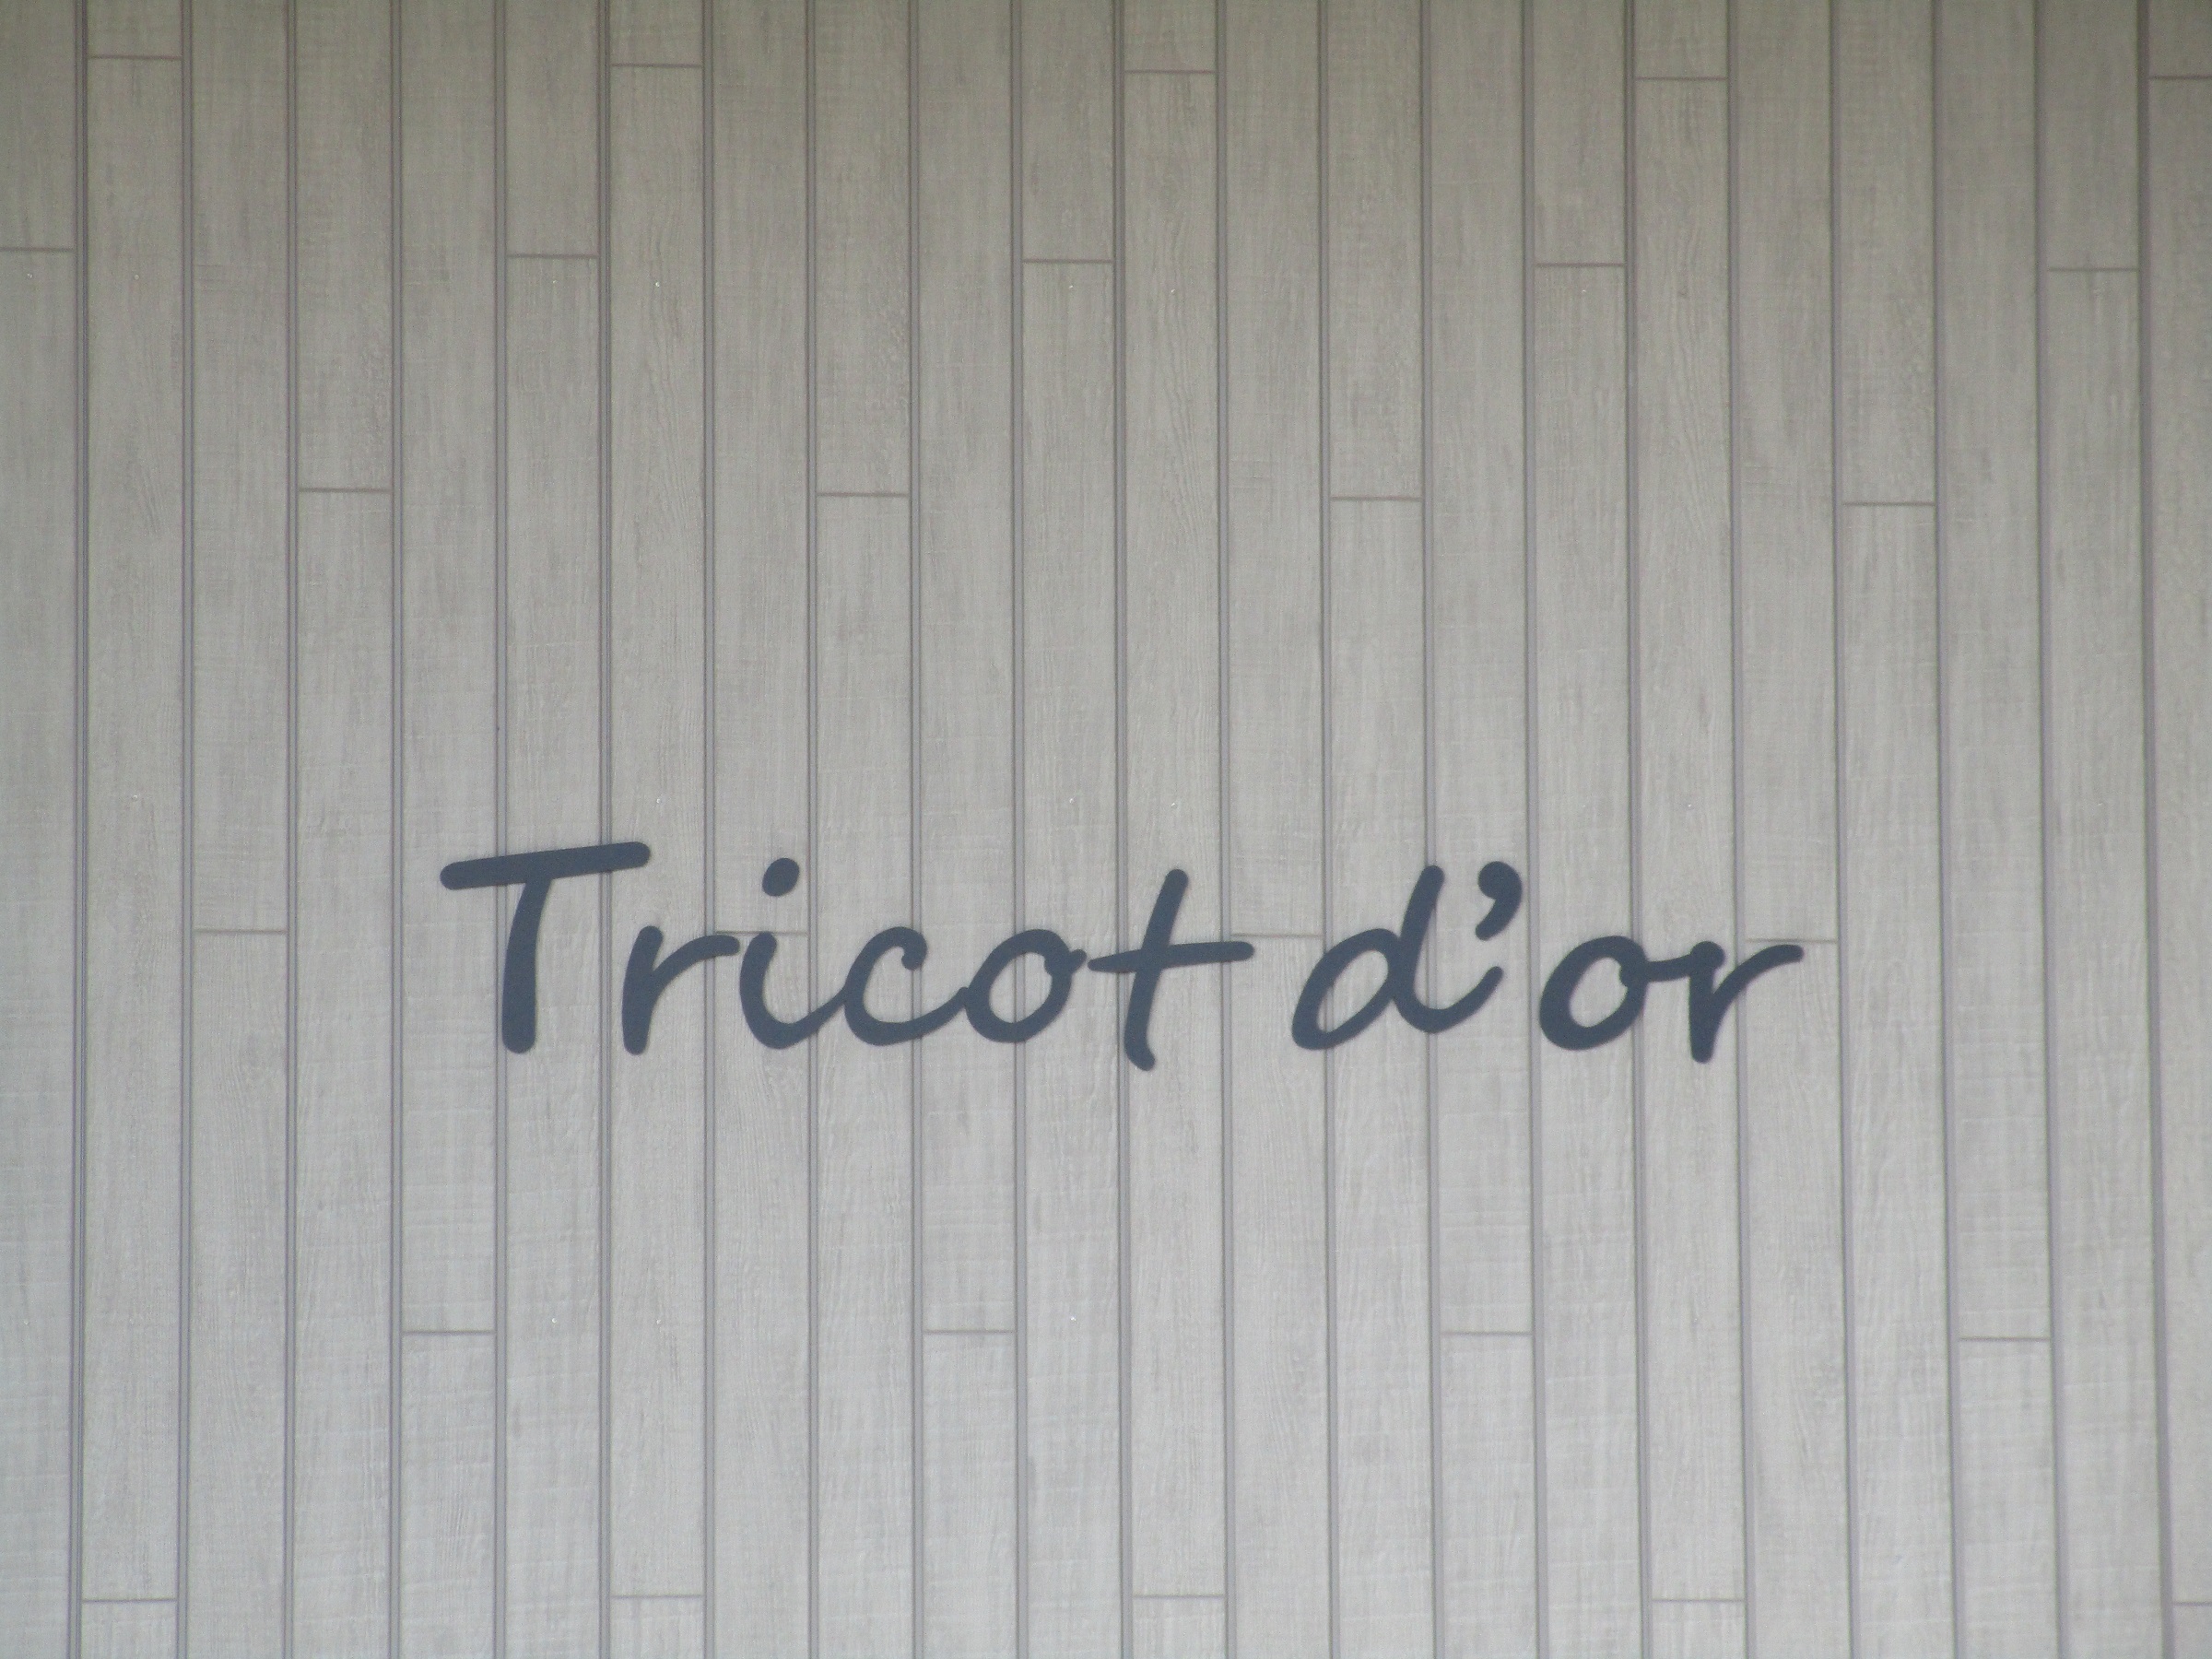 Tricot d'or 実店舗ロゴ